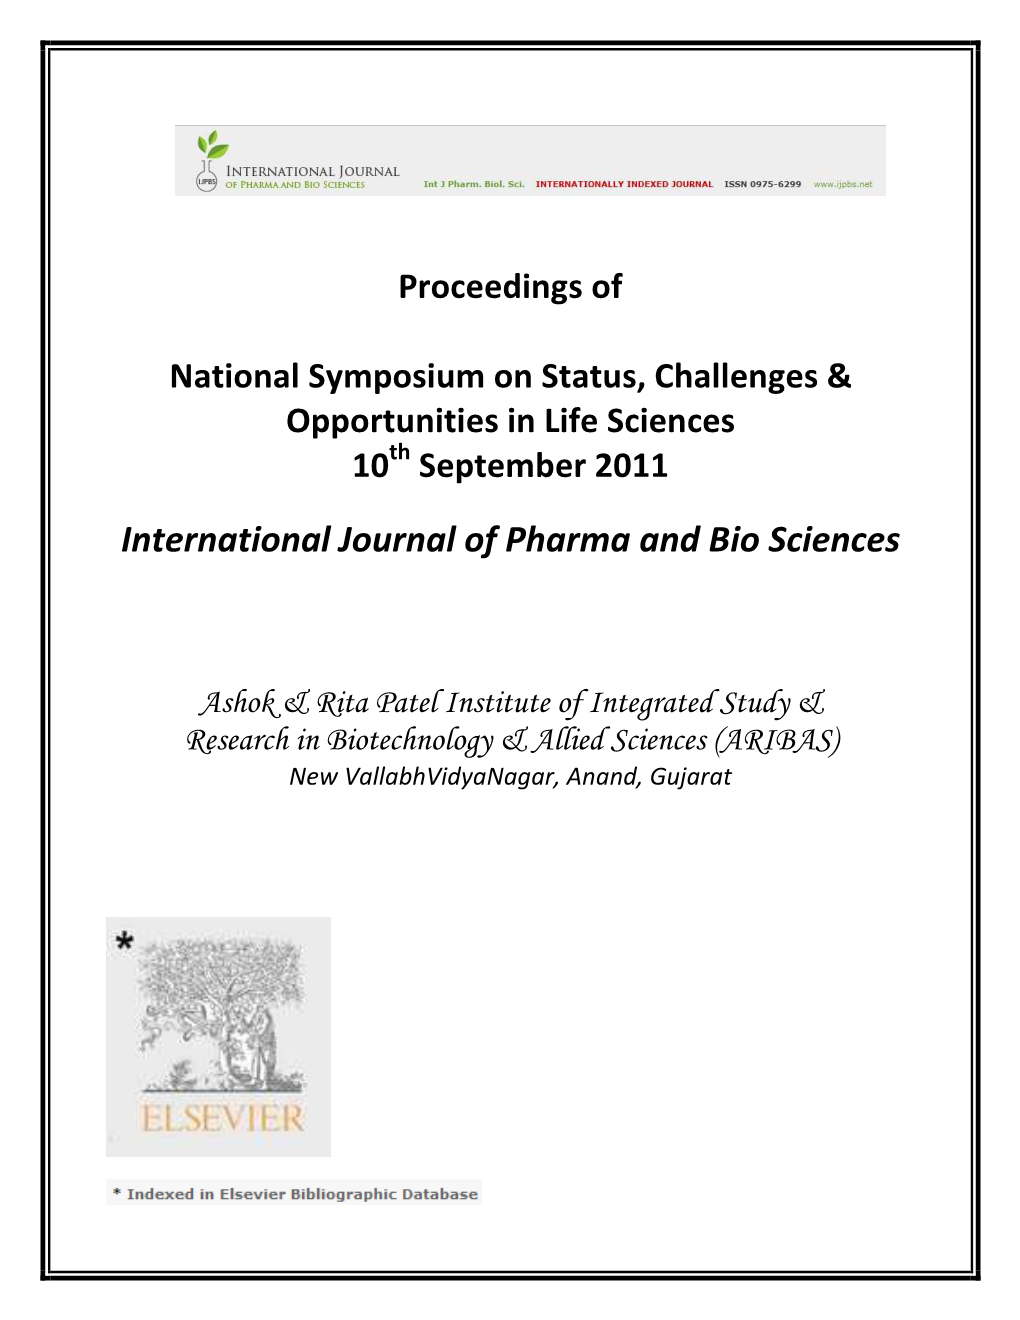 Proceedings of National Symposium on Status, Challenges & Opportunities in Life Sciences 10